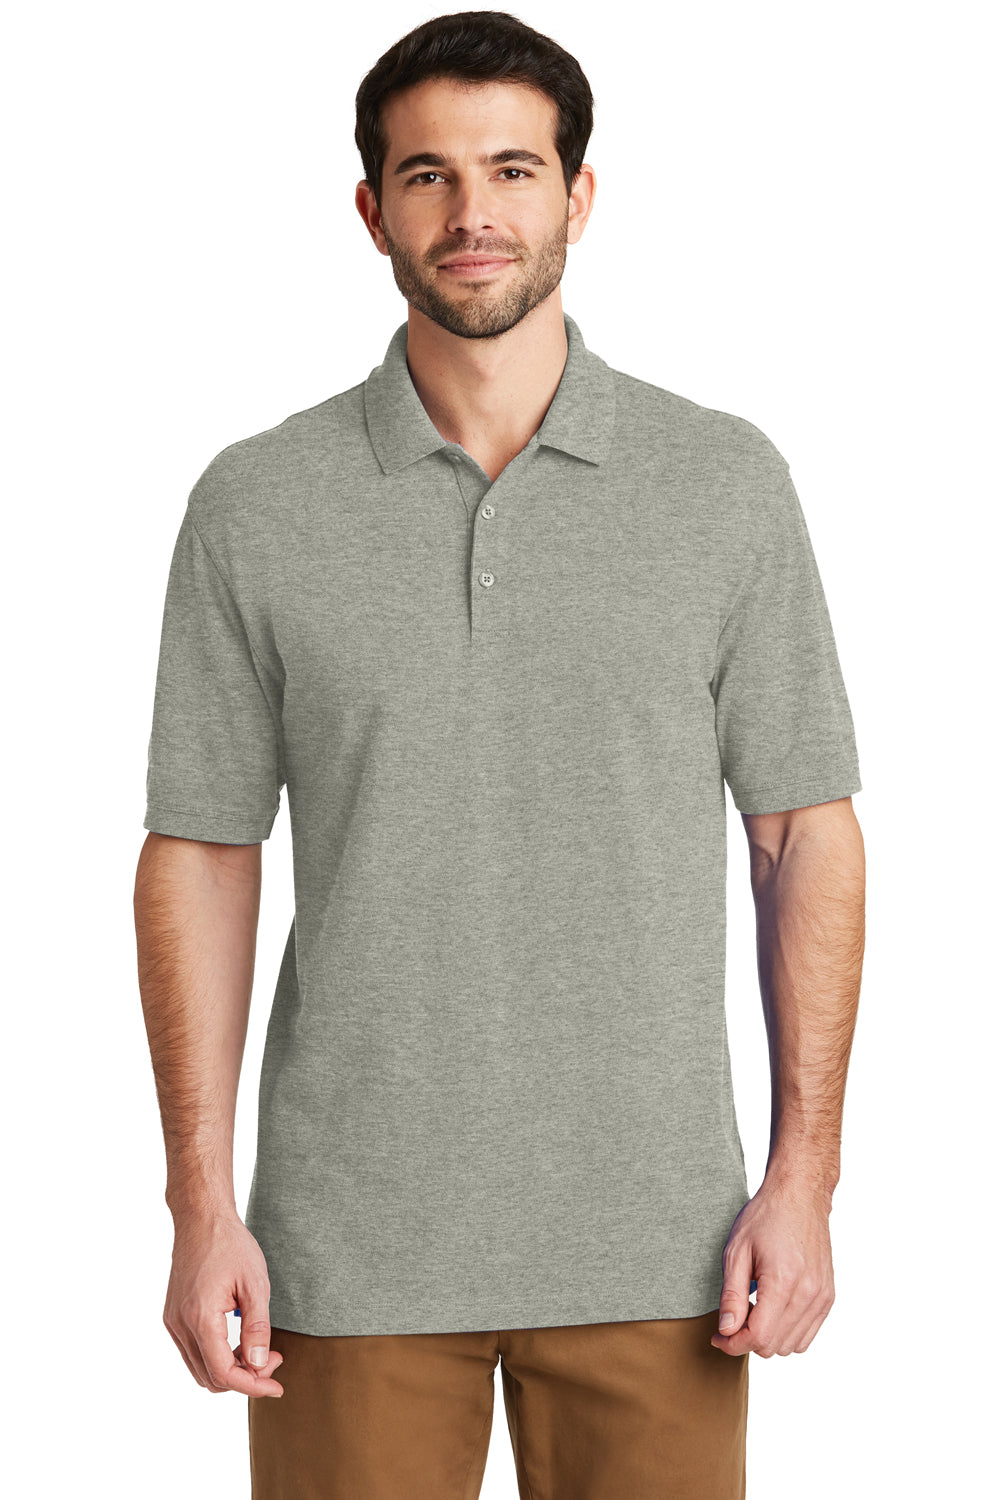 Port Authority K8000 Mens Wrinkle Resistant Short Sleeve Polo Shirt Heather Oxford Grey Front